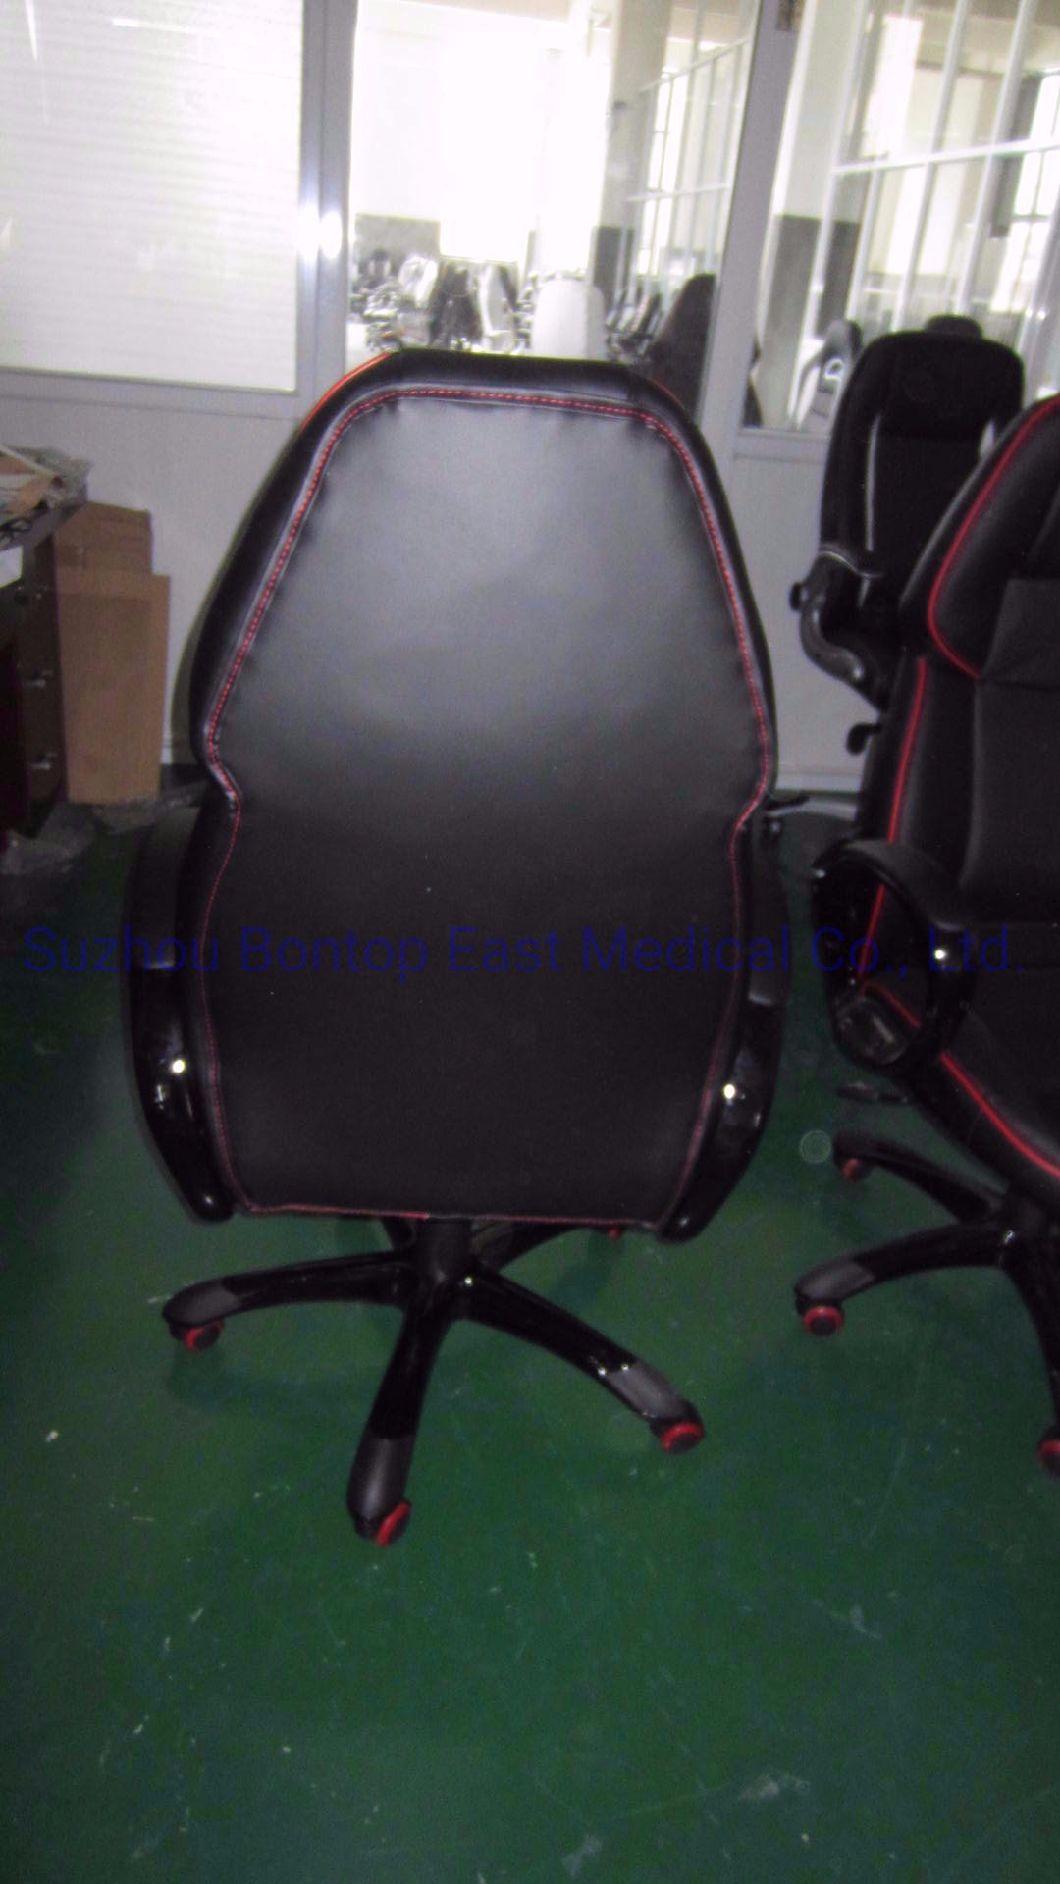 High Quality Ergonomic Office Manager Boss Computer Conference PU Leather Office Chair